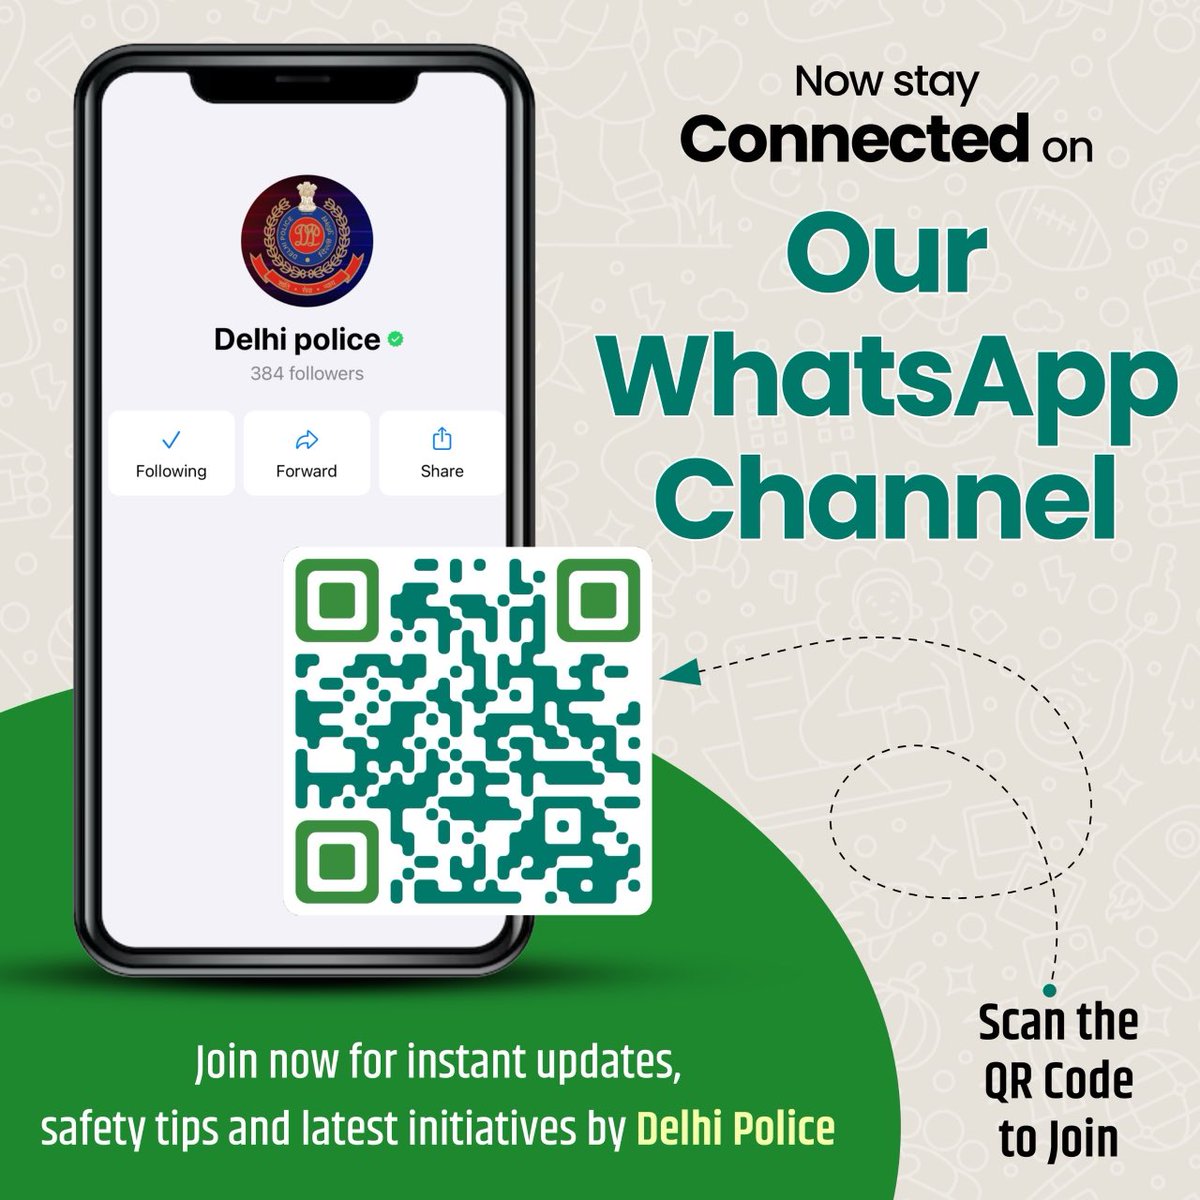 Stay connected, stay safe! Join Delhi Police's WhatsApp channel for instant updates, safety tips, and to know about the latest initiatives by Delhi Police. Your safety matters to us. Jai Hind